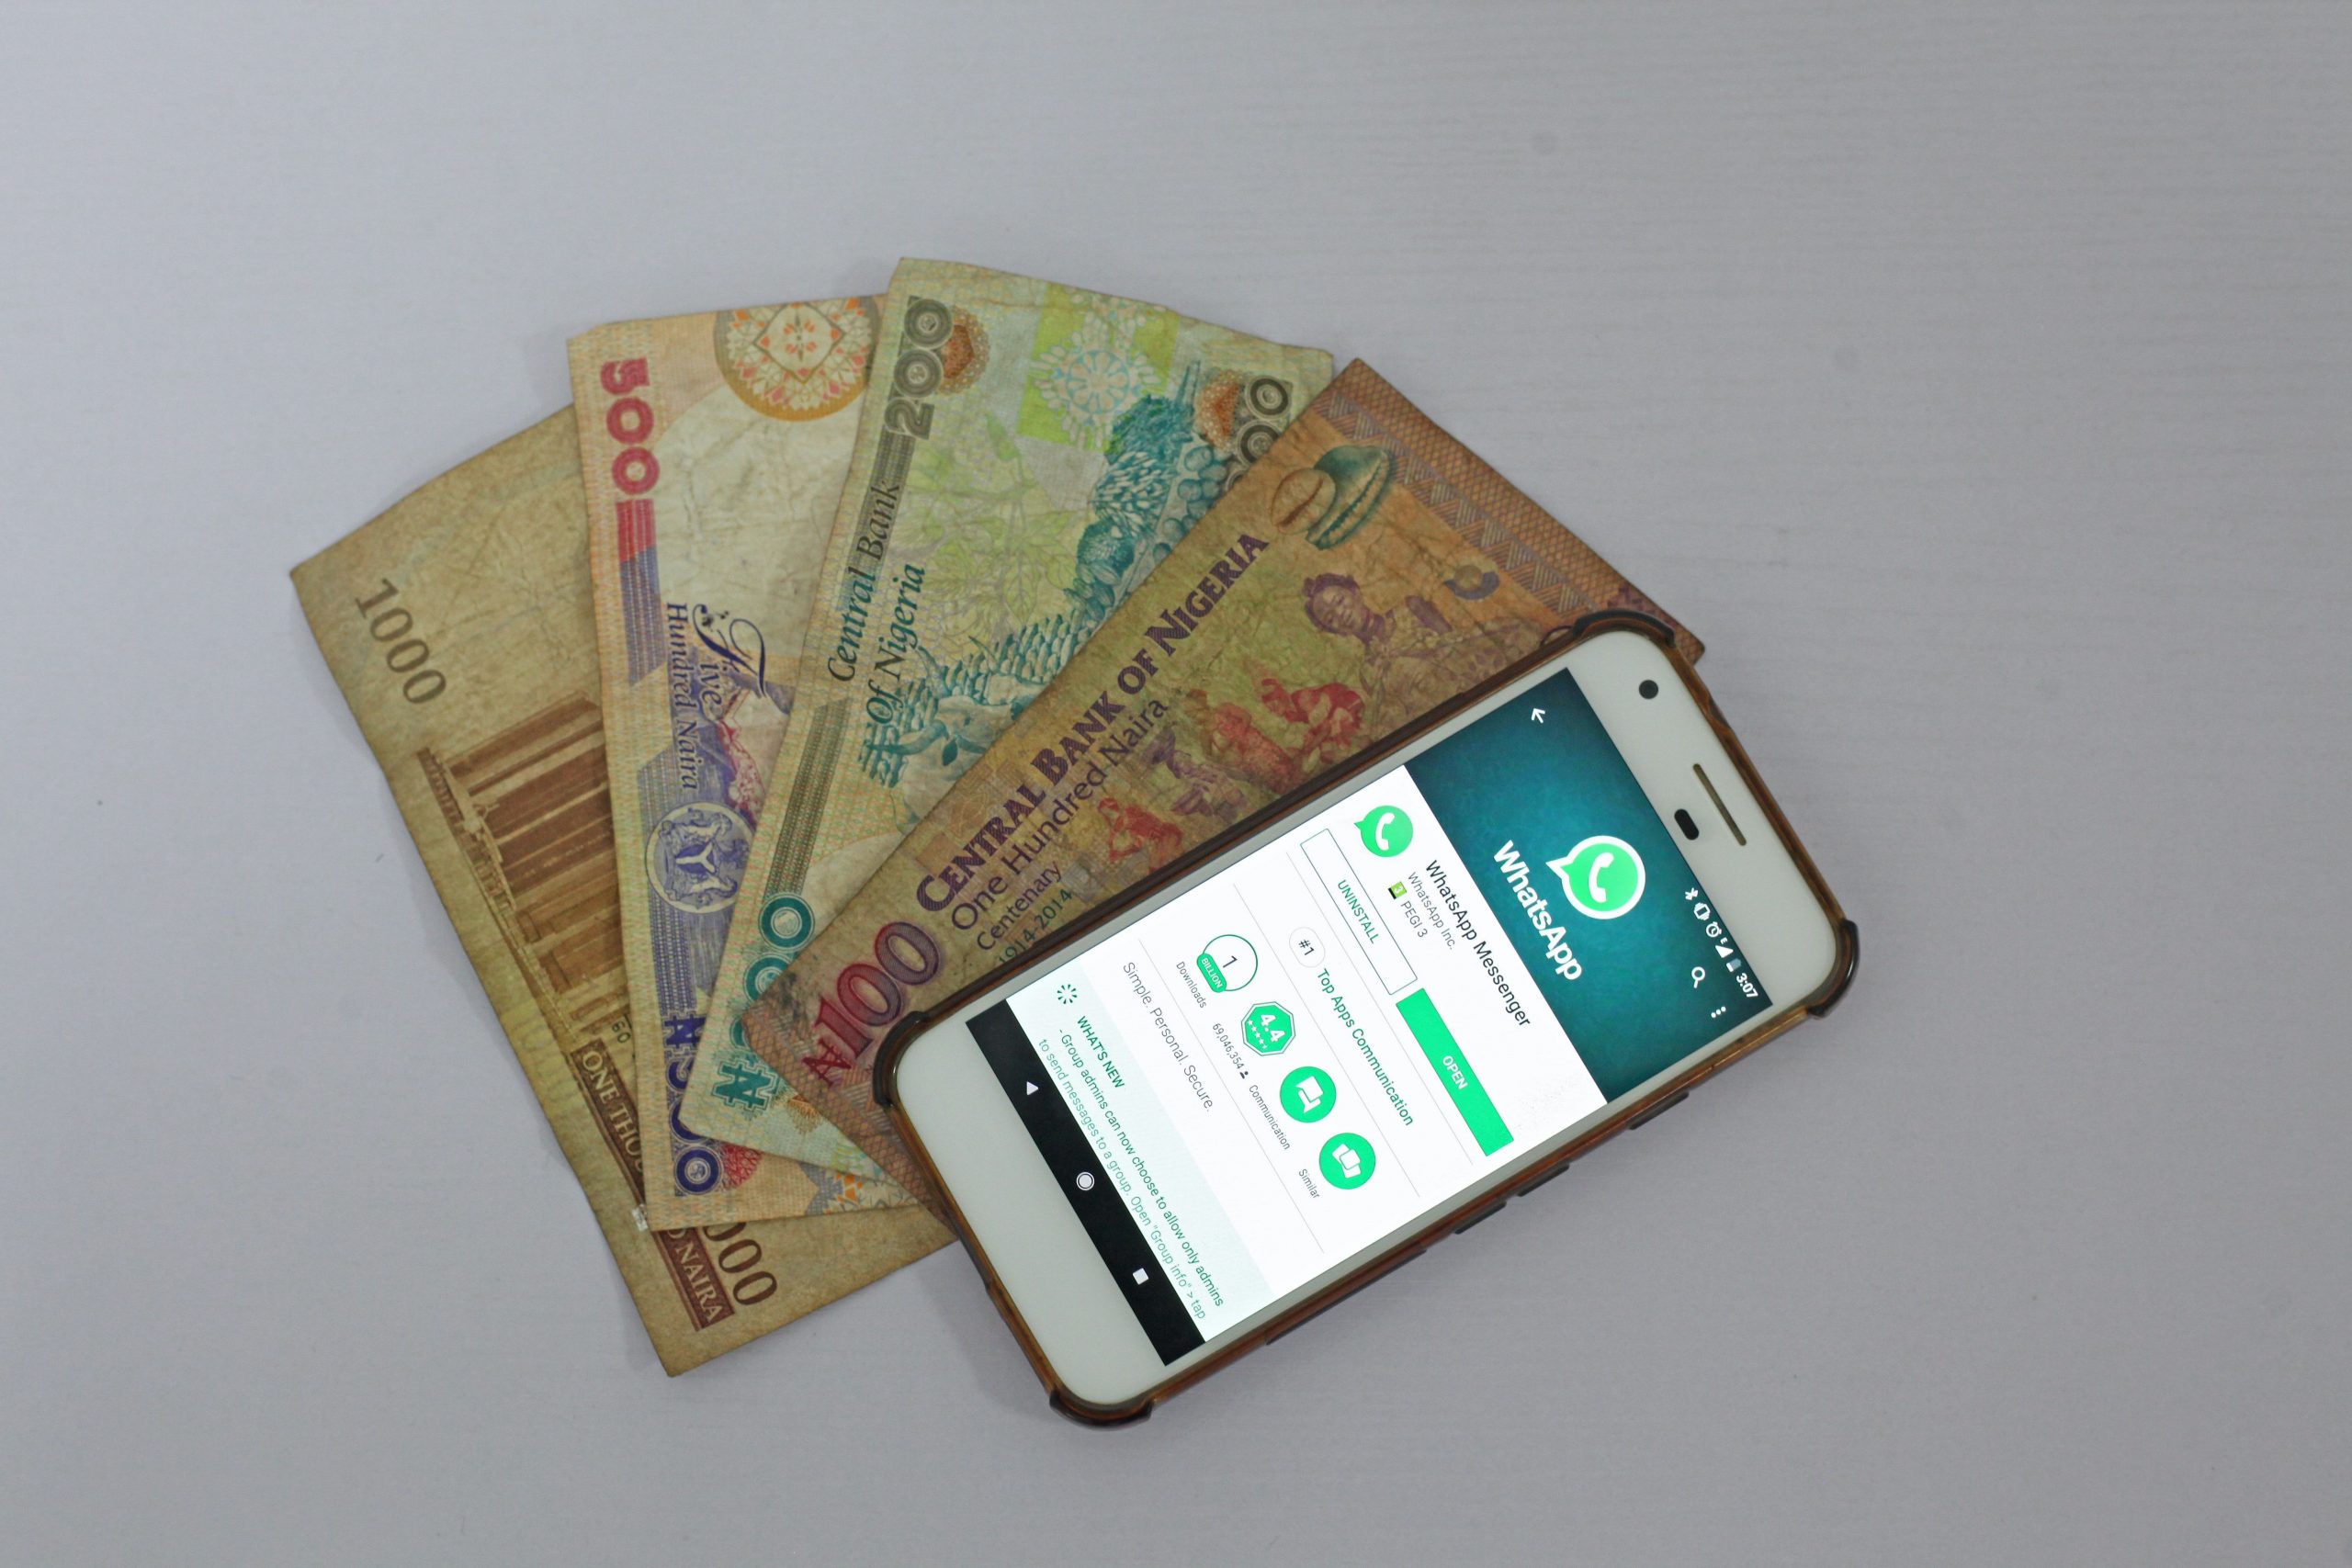 WhatsApp Payments: Guide on how to set up, make transaction